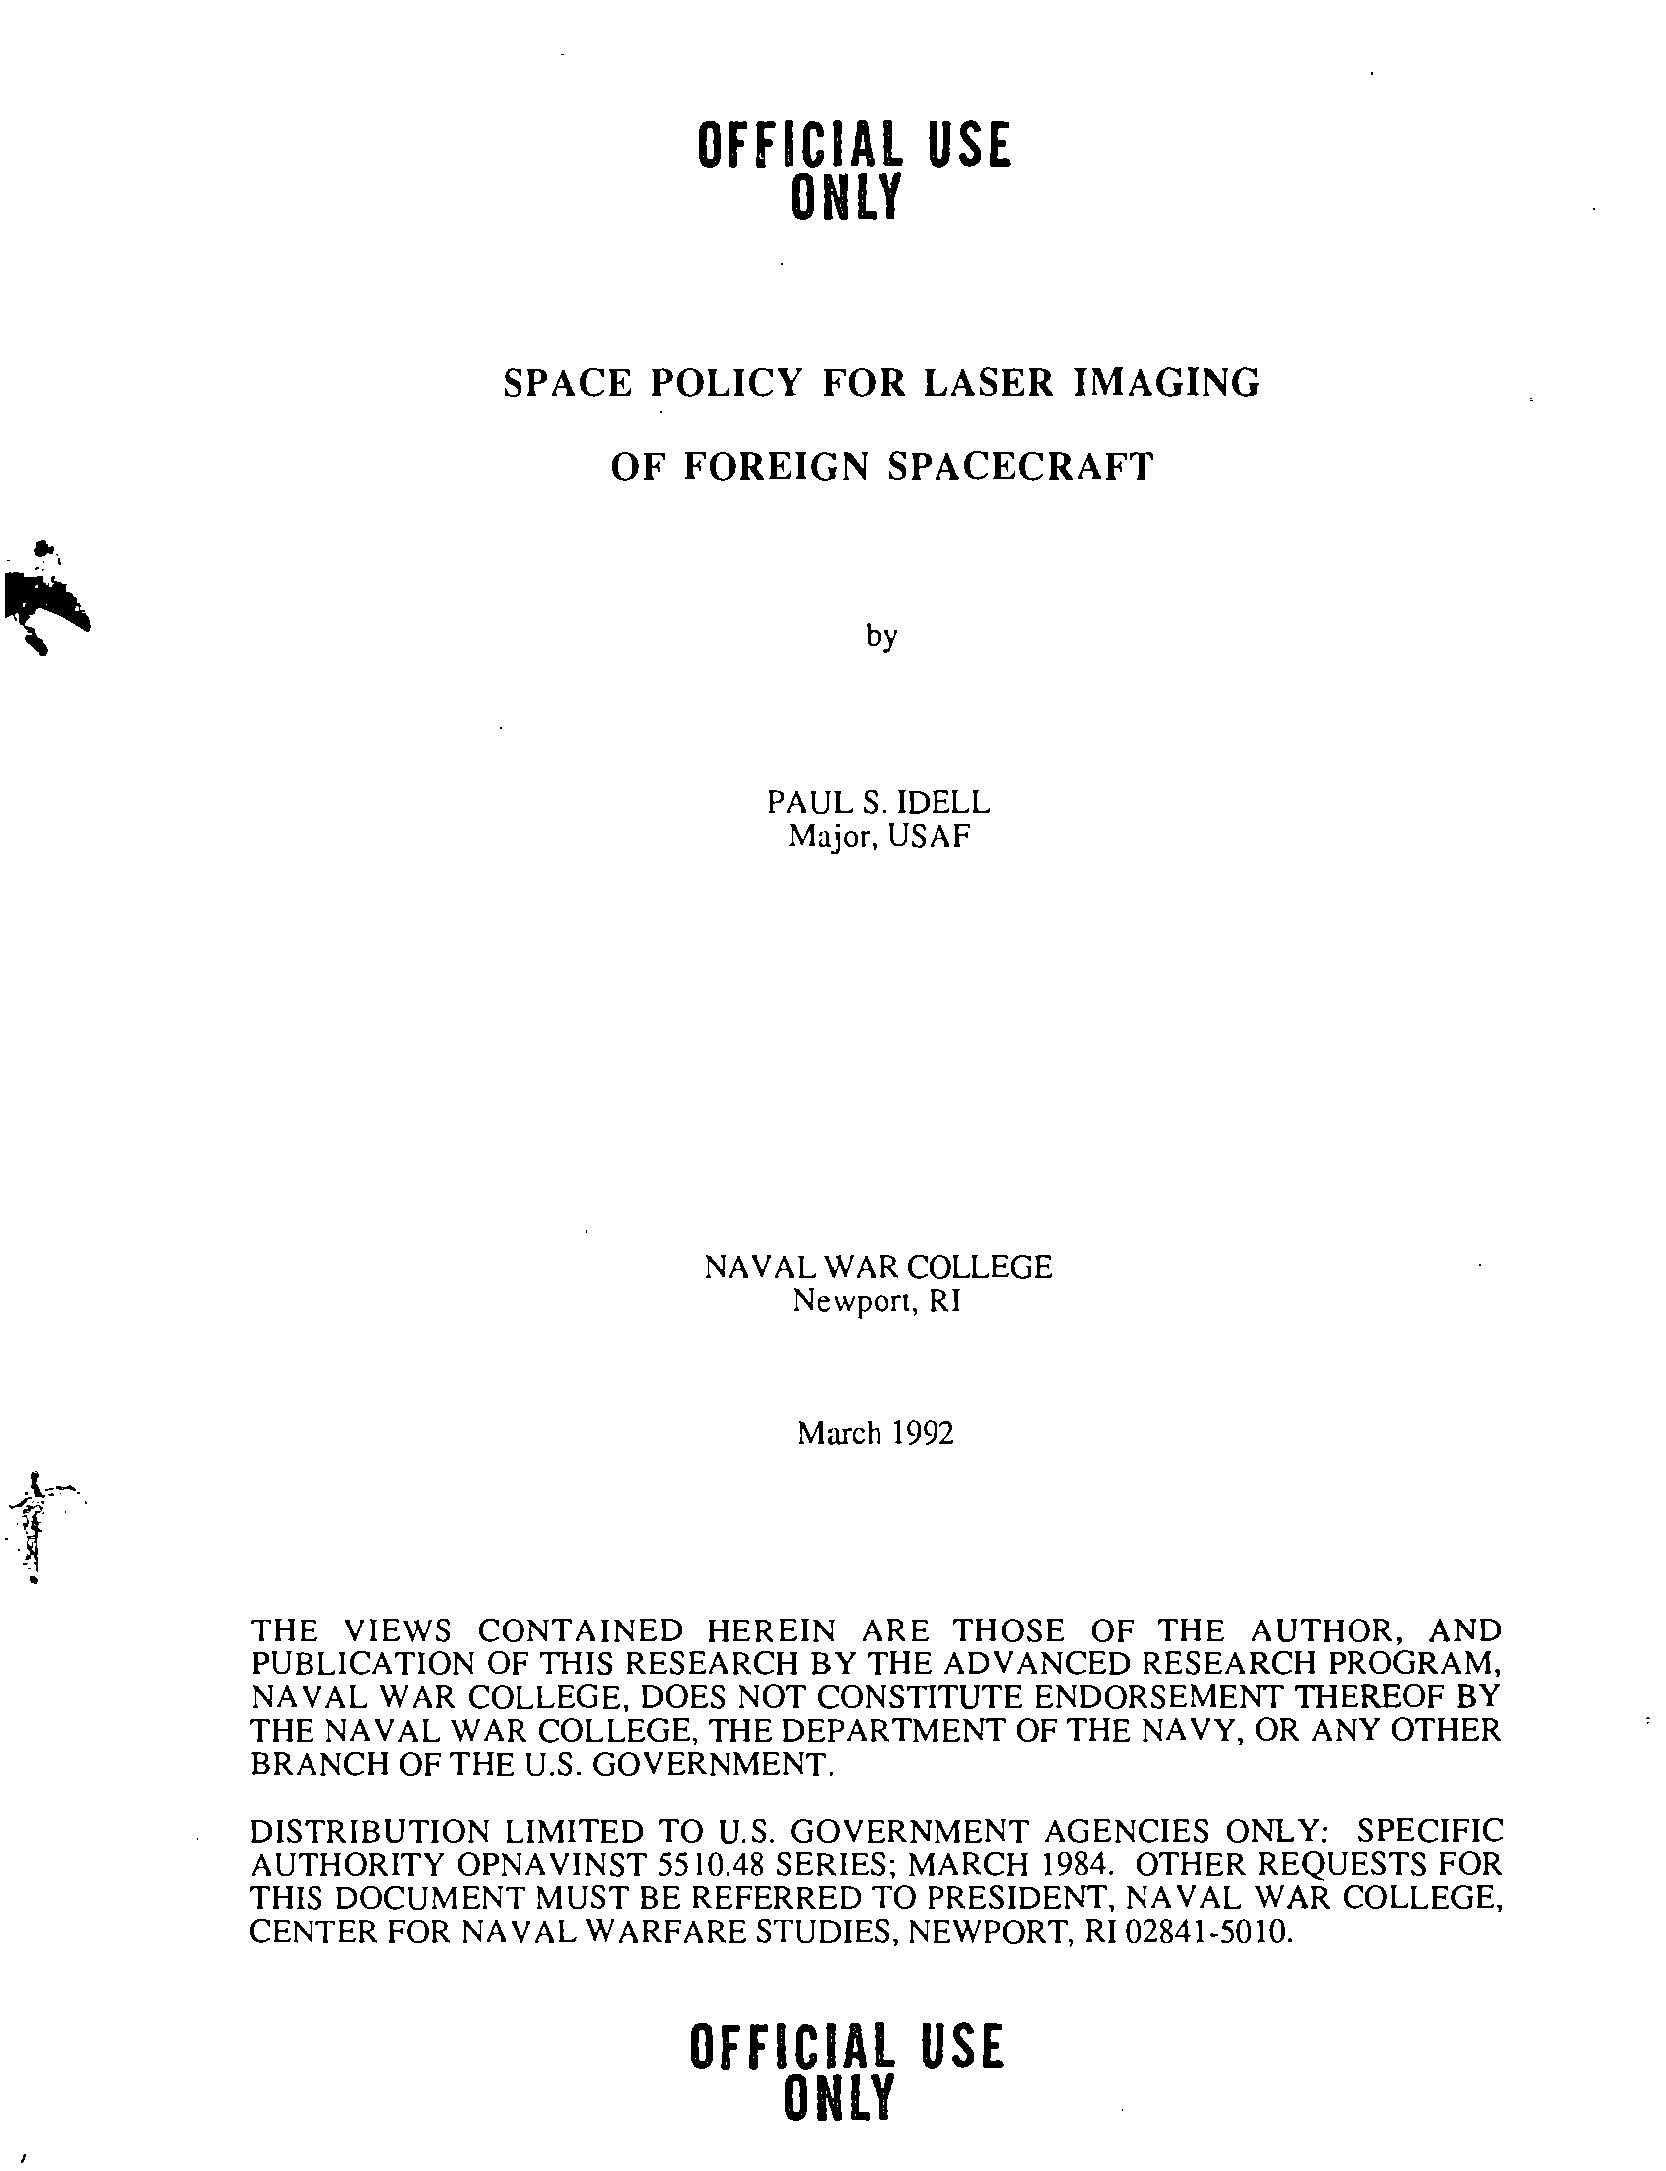 Space Policy For Laser Imaging of Foreign Spacecraft, by Paul S. Idell